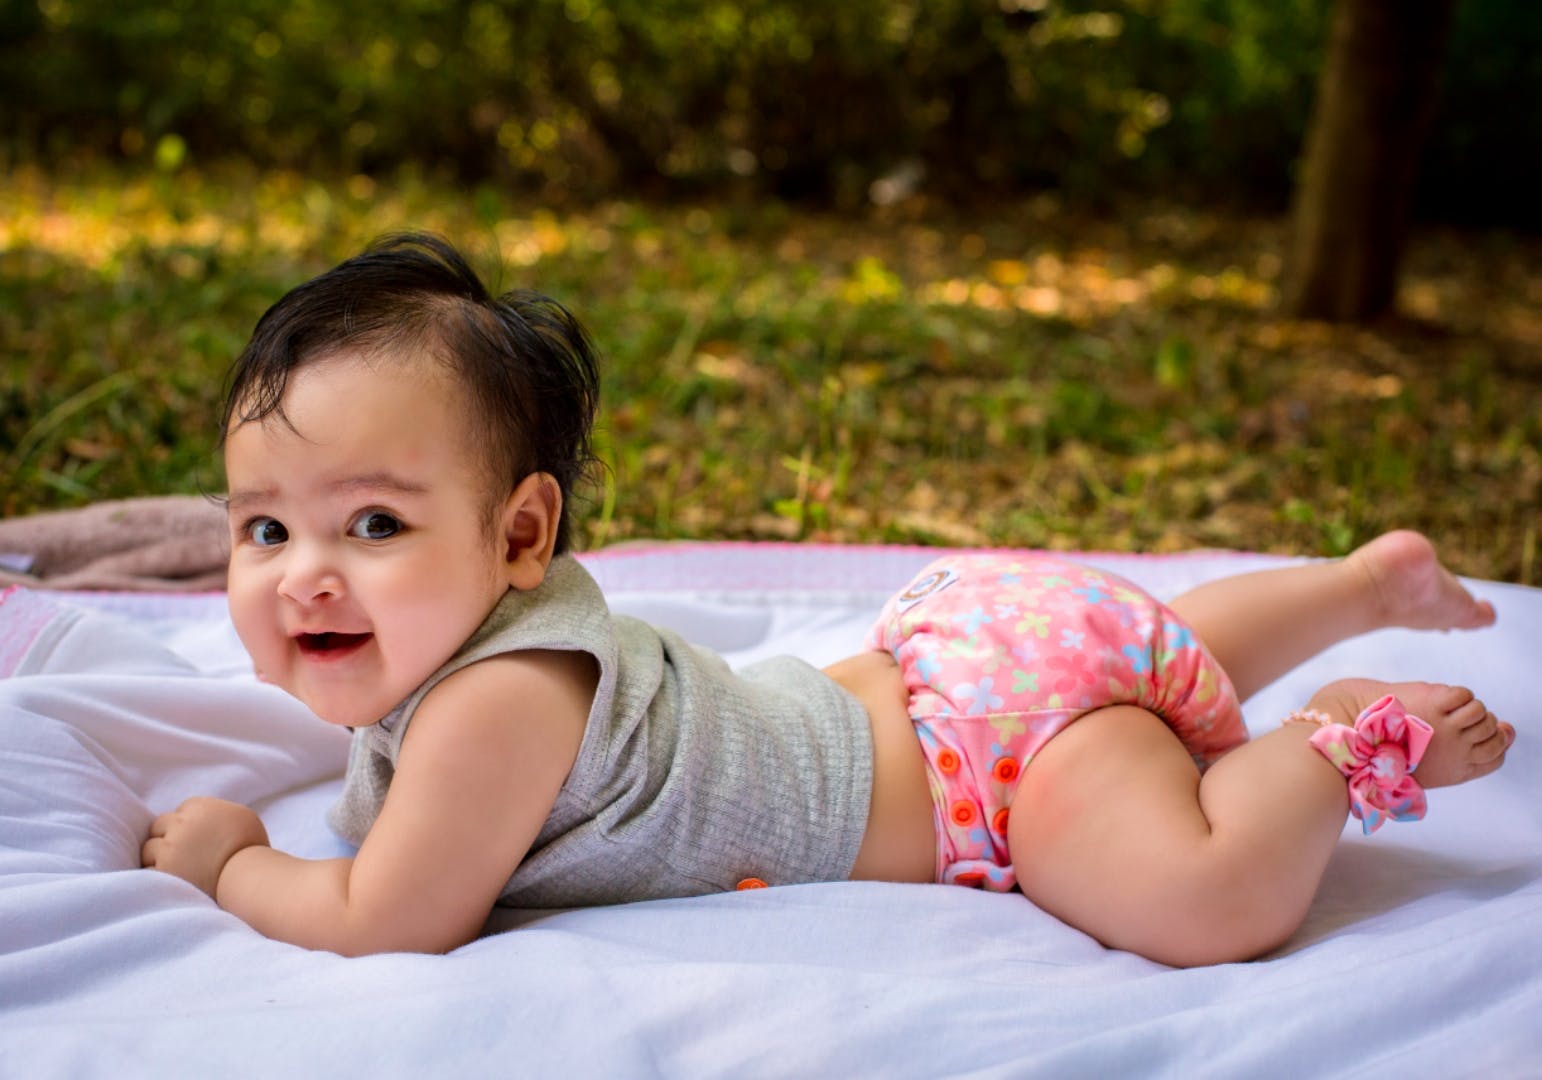 4 Benefits Of Cloth Diapers Vs. Disposable Diapers